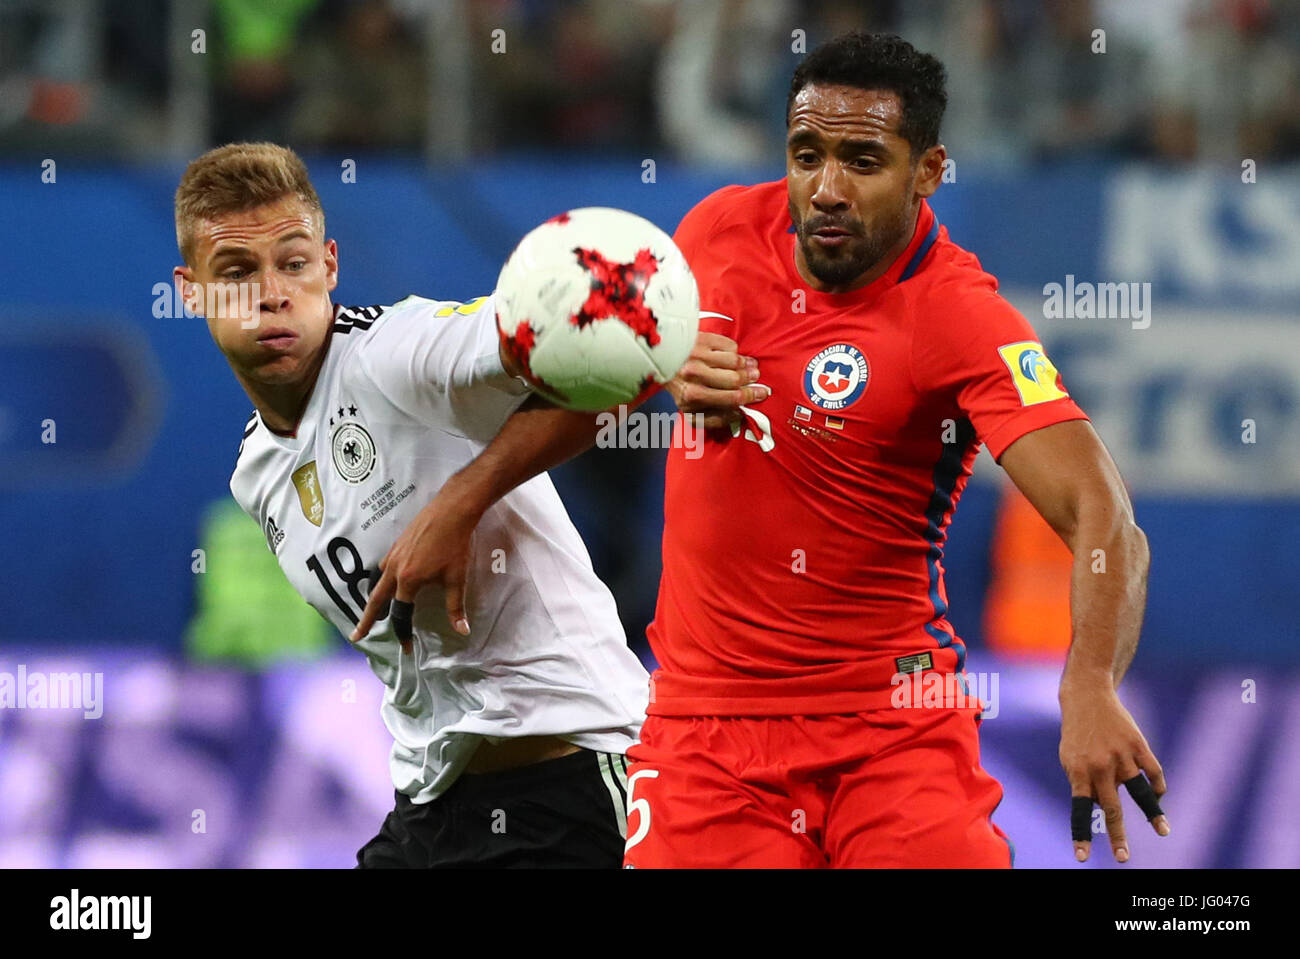 Saint Petersburg, Russia. 2nd July, 2017. Chile's Jean Beausejour (r) and Germany's Joshua Kimmich in action during the Confederations Cup finale between Chile and Germany at the Saint Petersburg Stadium in Saint Petersburg, Russia, 2 July 2017. Photo: Christian Charisius/dpa/Alamy Live News Stock Photo